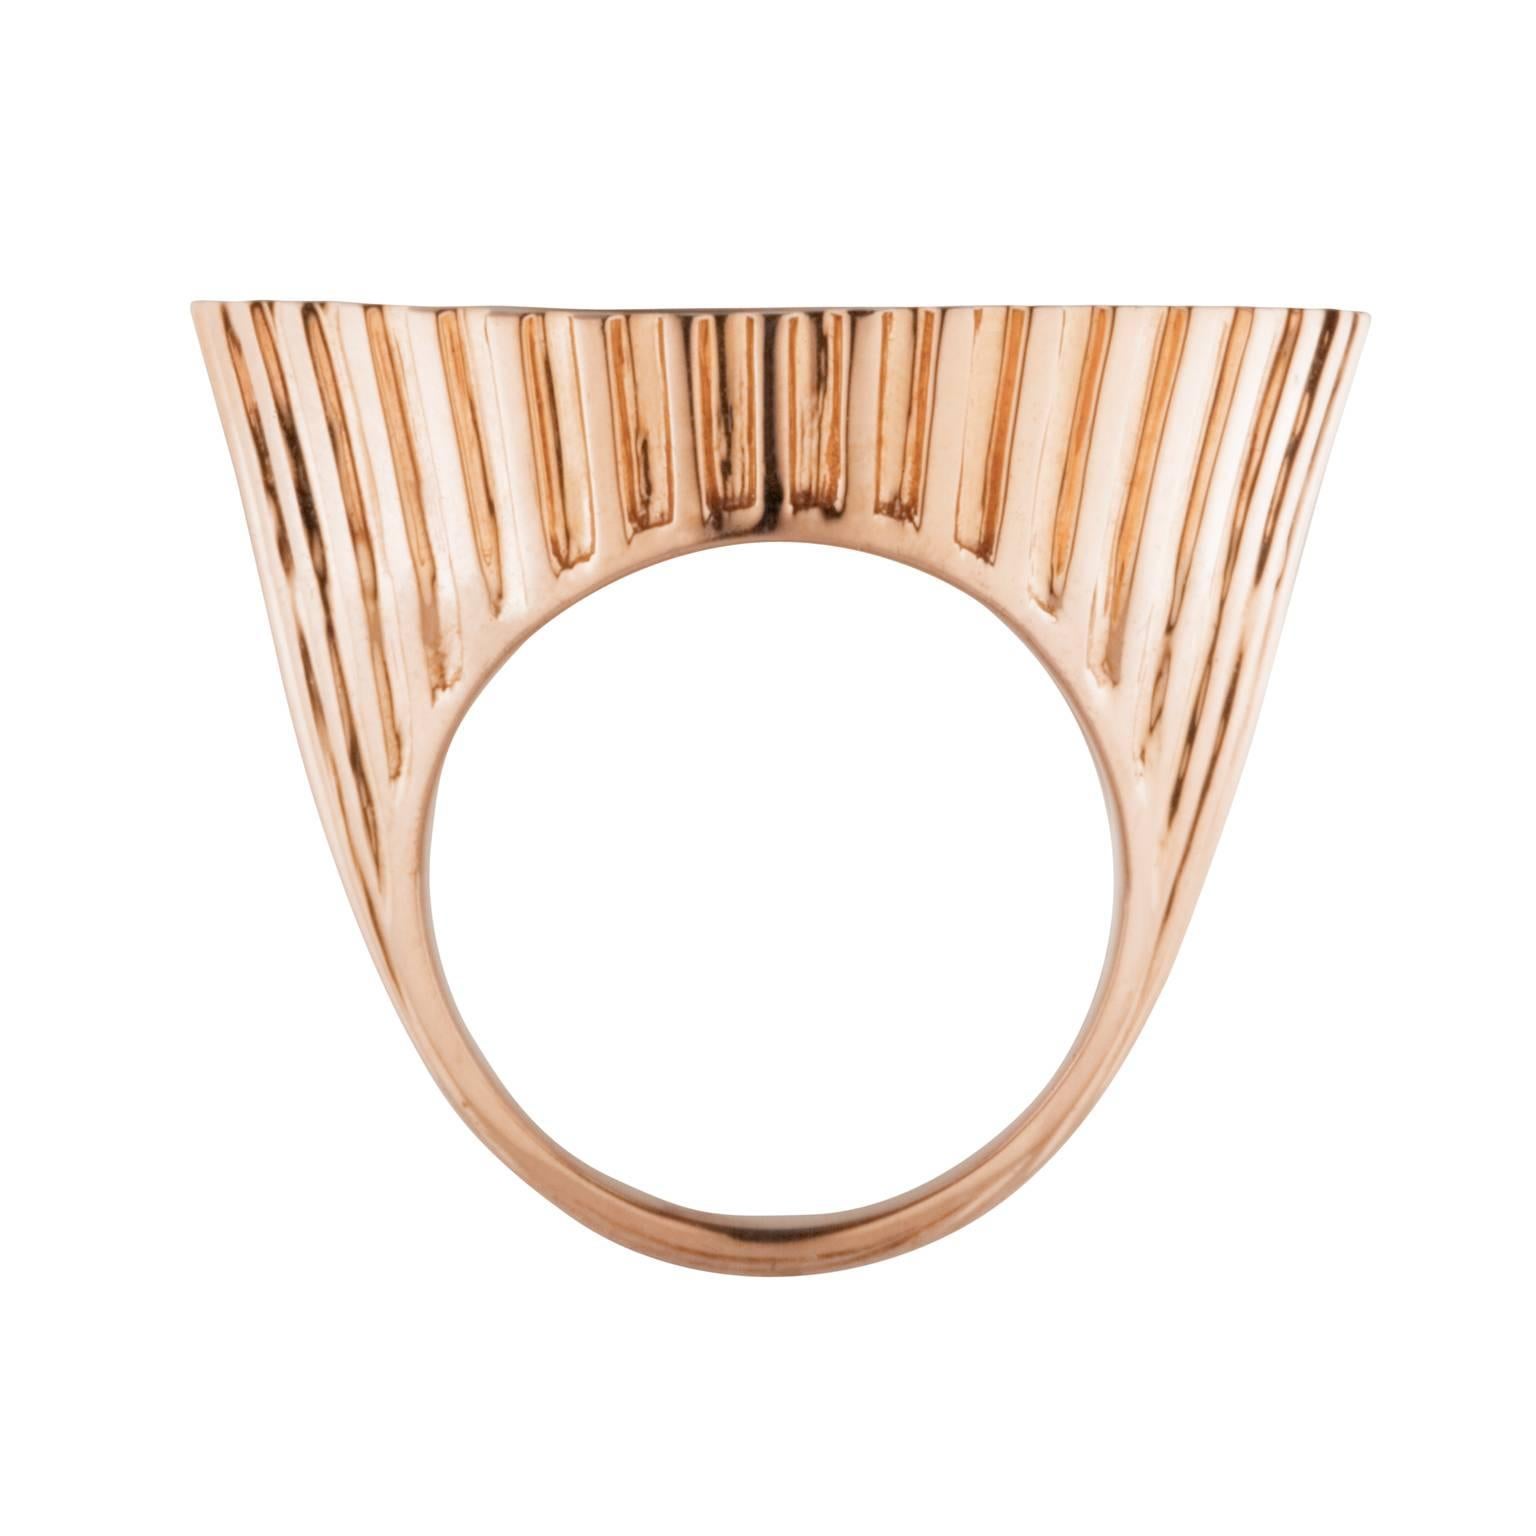 VINCENT’S EMPTY SOVEREIGN RING ROSE

This ring is the hero of the Hannah Martin London collection entitled 'Vincent', without doubt a true show stopper. 

This ring toys with a traditional jewellery concept, subverts it and leaves us with an